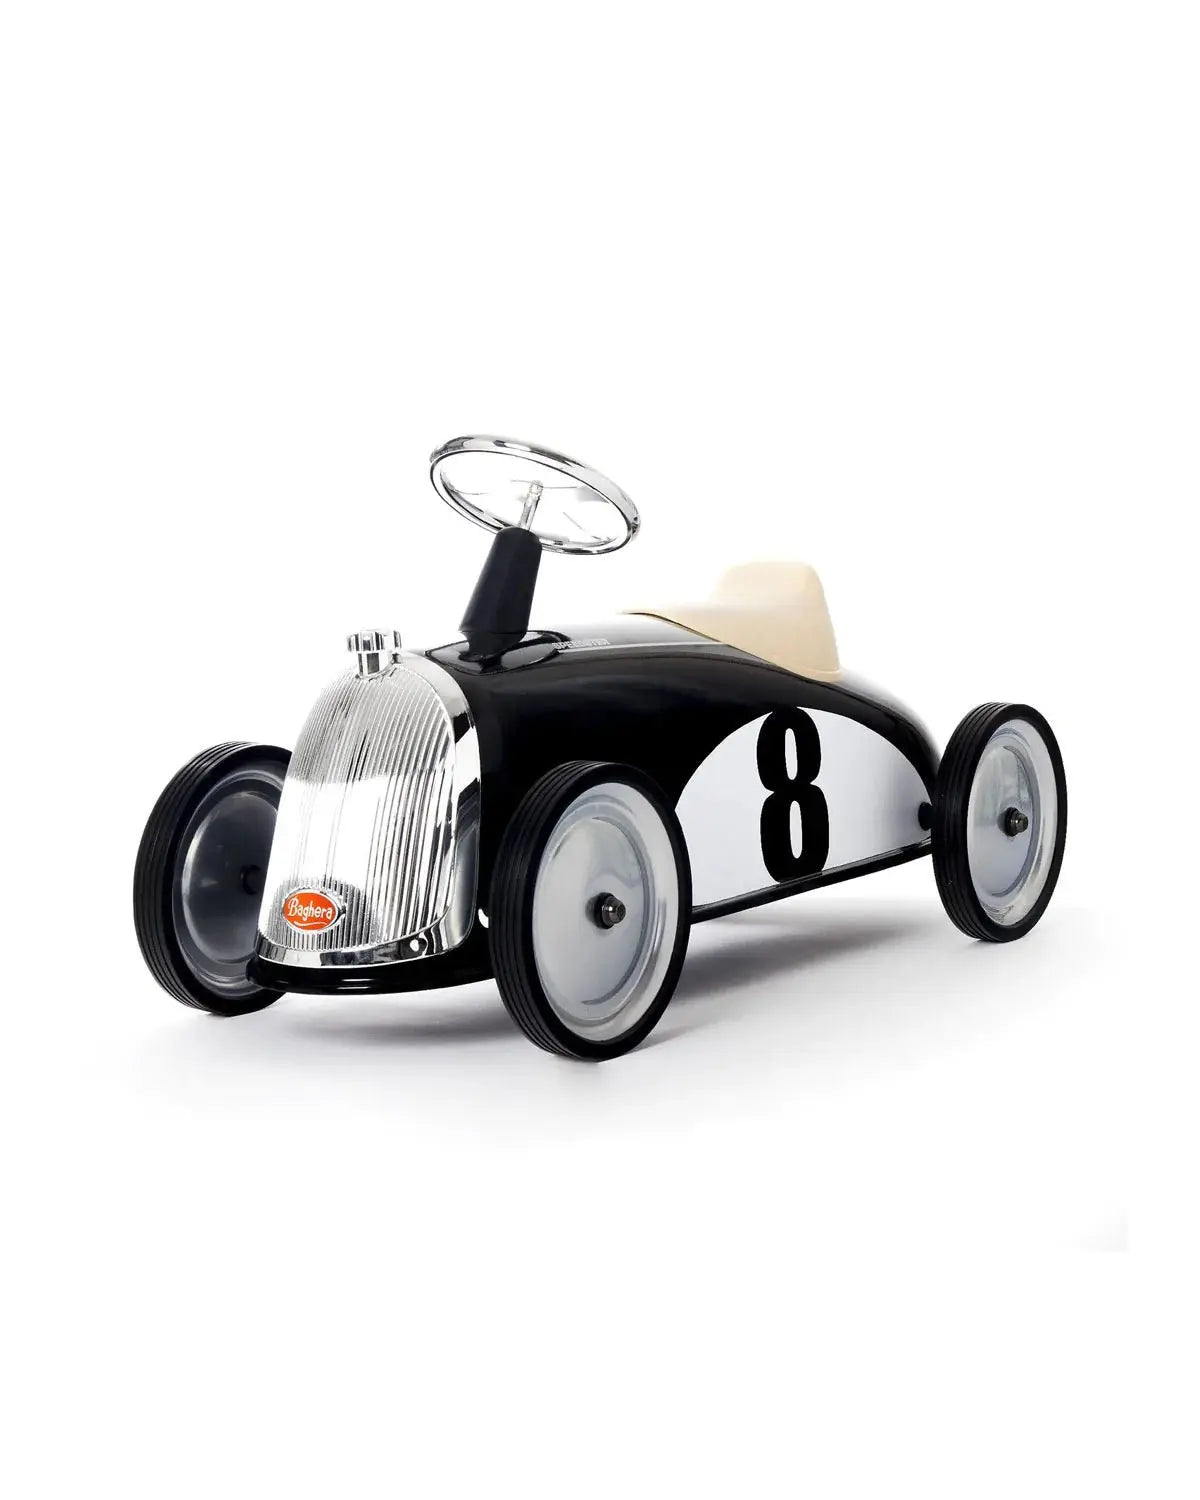 Ride-on Rider Toy Car, Durable Vintage Design, Classic Style, Kids Ride On, Retro Inspired  Baghera Black  